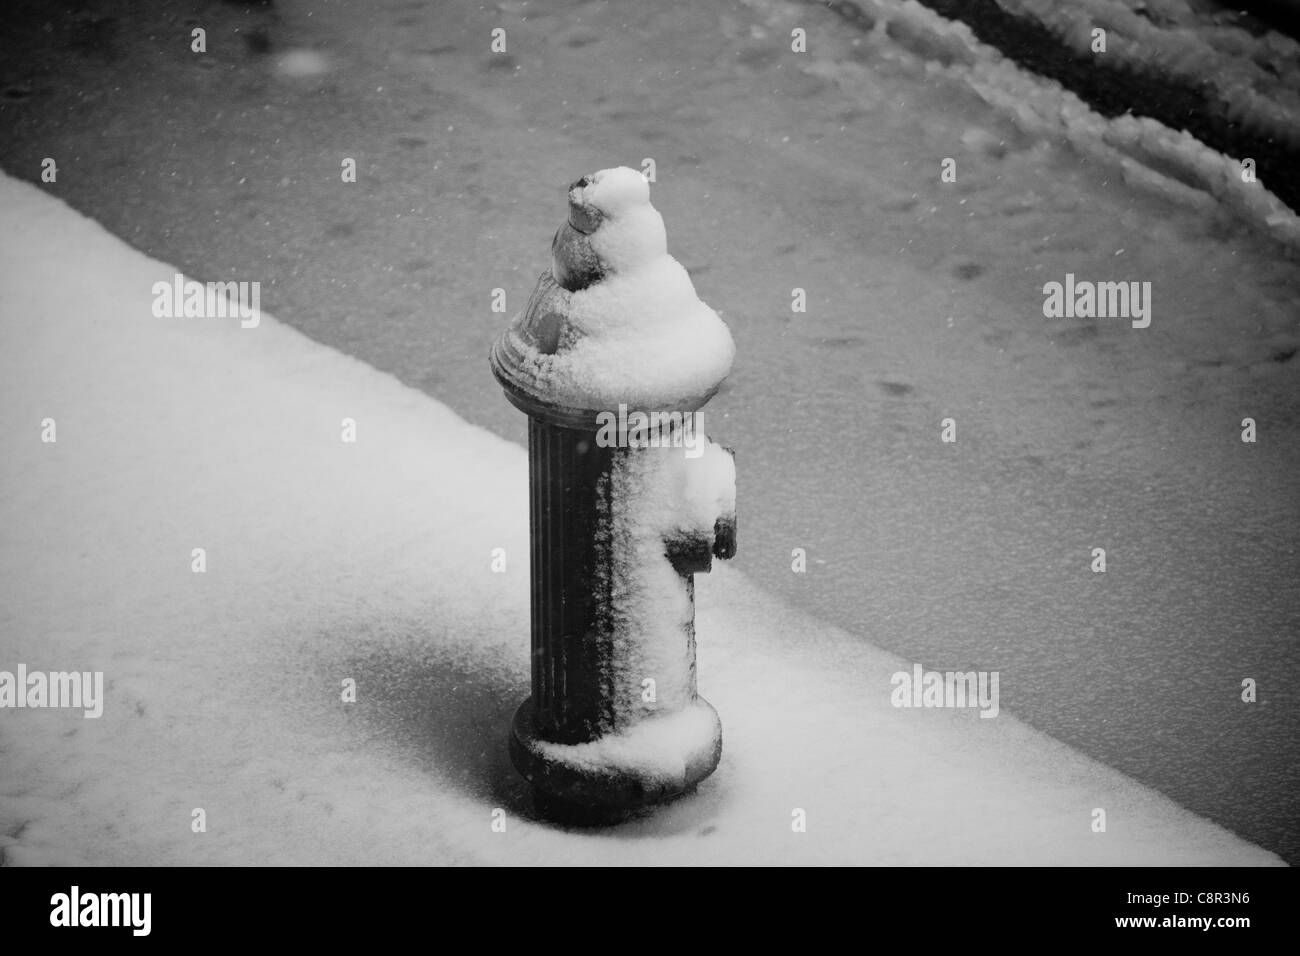 Fire hydrant covered in snow in New York Stock Photo